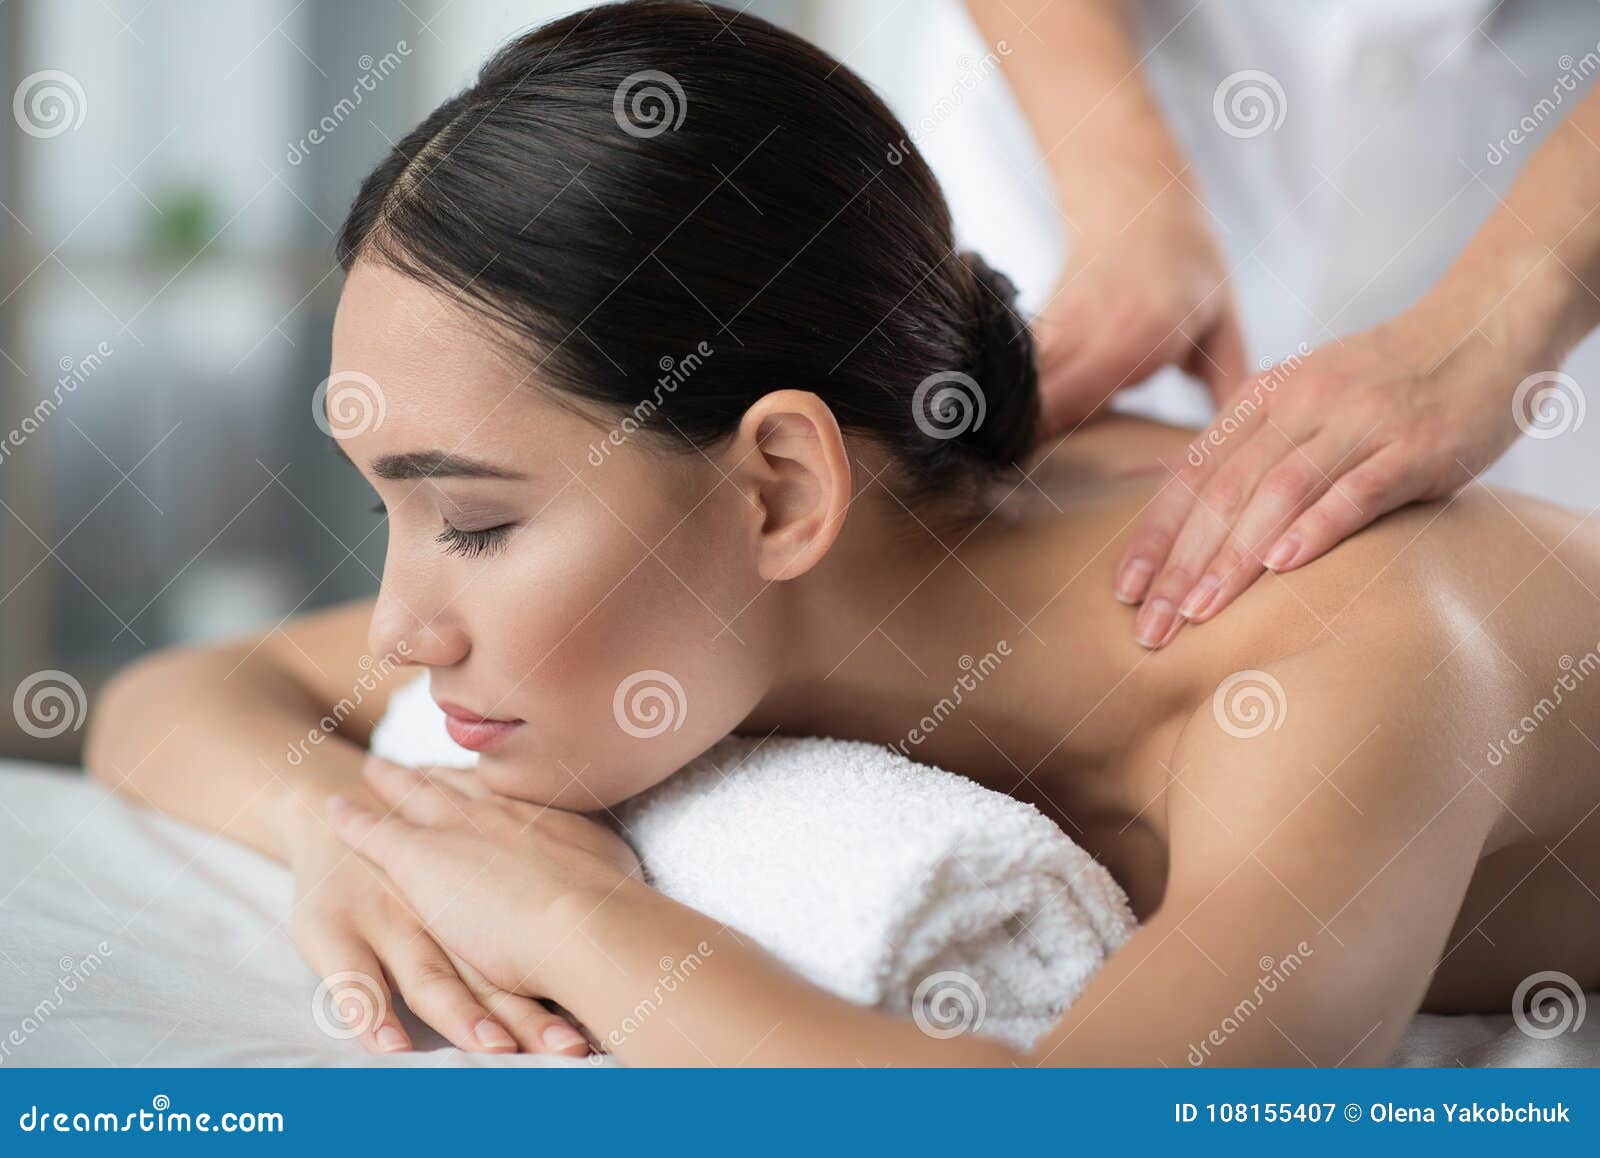 Sensual Young Woman Getting Relaxation Treatment at Spa Stock Image - Image  of asian, lifestyle: 108155407